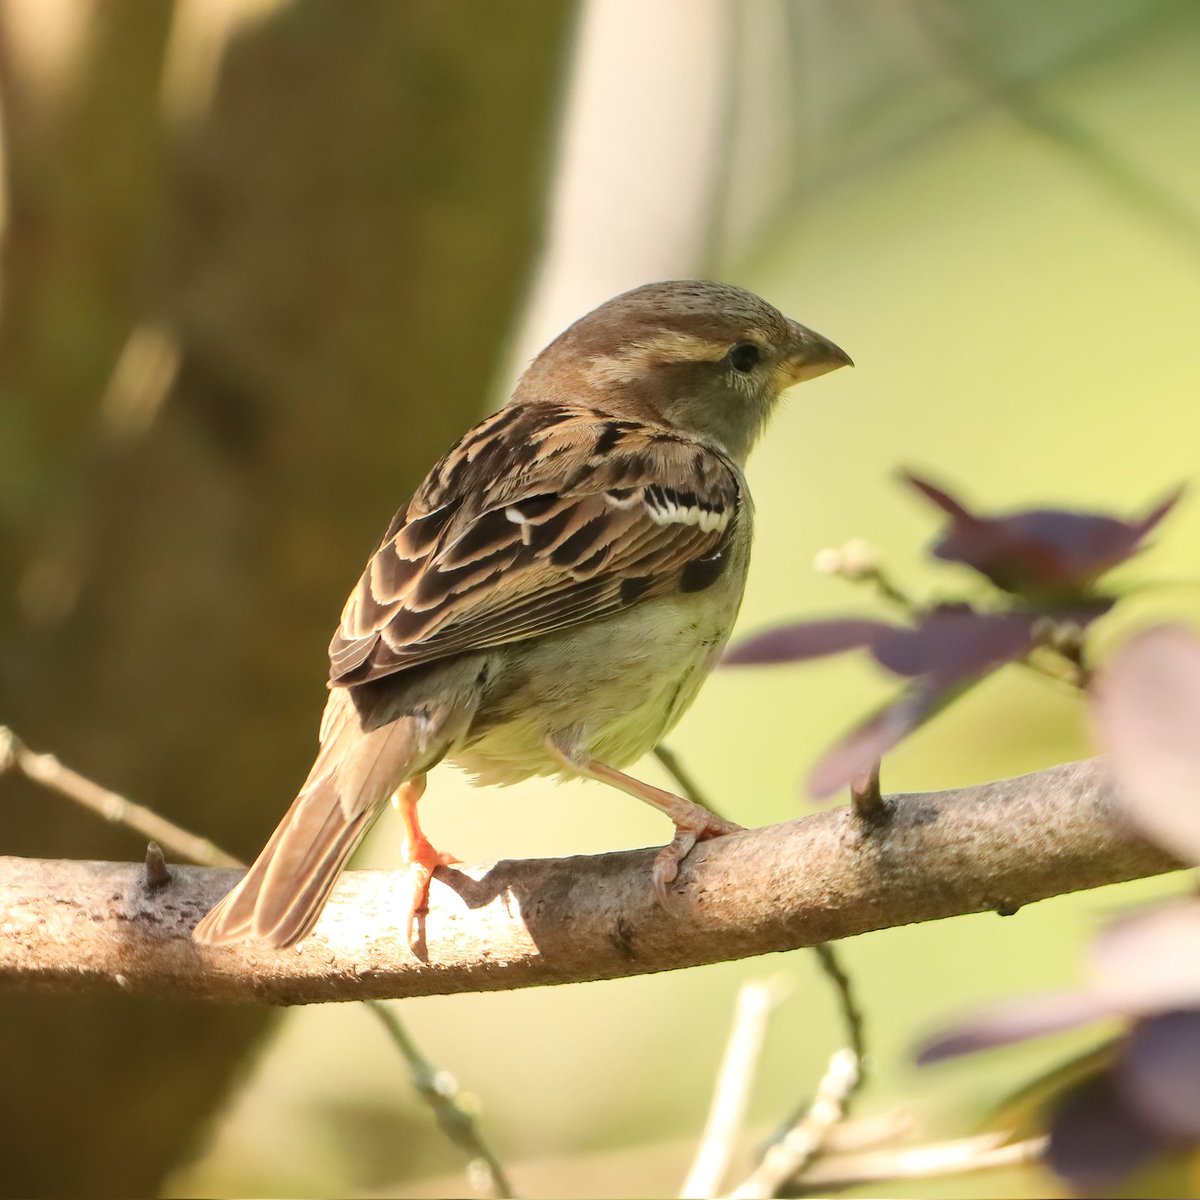 I will forever adore the sweetness of sparrows... #housesparrows #housesparrow #sparrows #birds #sparrow #birdworld #ohiobirdworld #ohiobirdlovers #birdlovers #birdwatching #birdwatchers #birdlife #birdwatchersdaily #birdwatcher #birdloversdaily #backyardbirding #ohiobirds